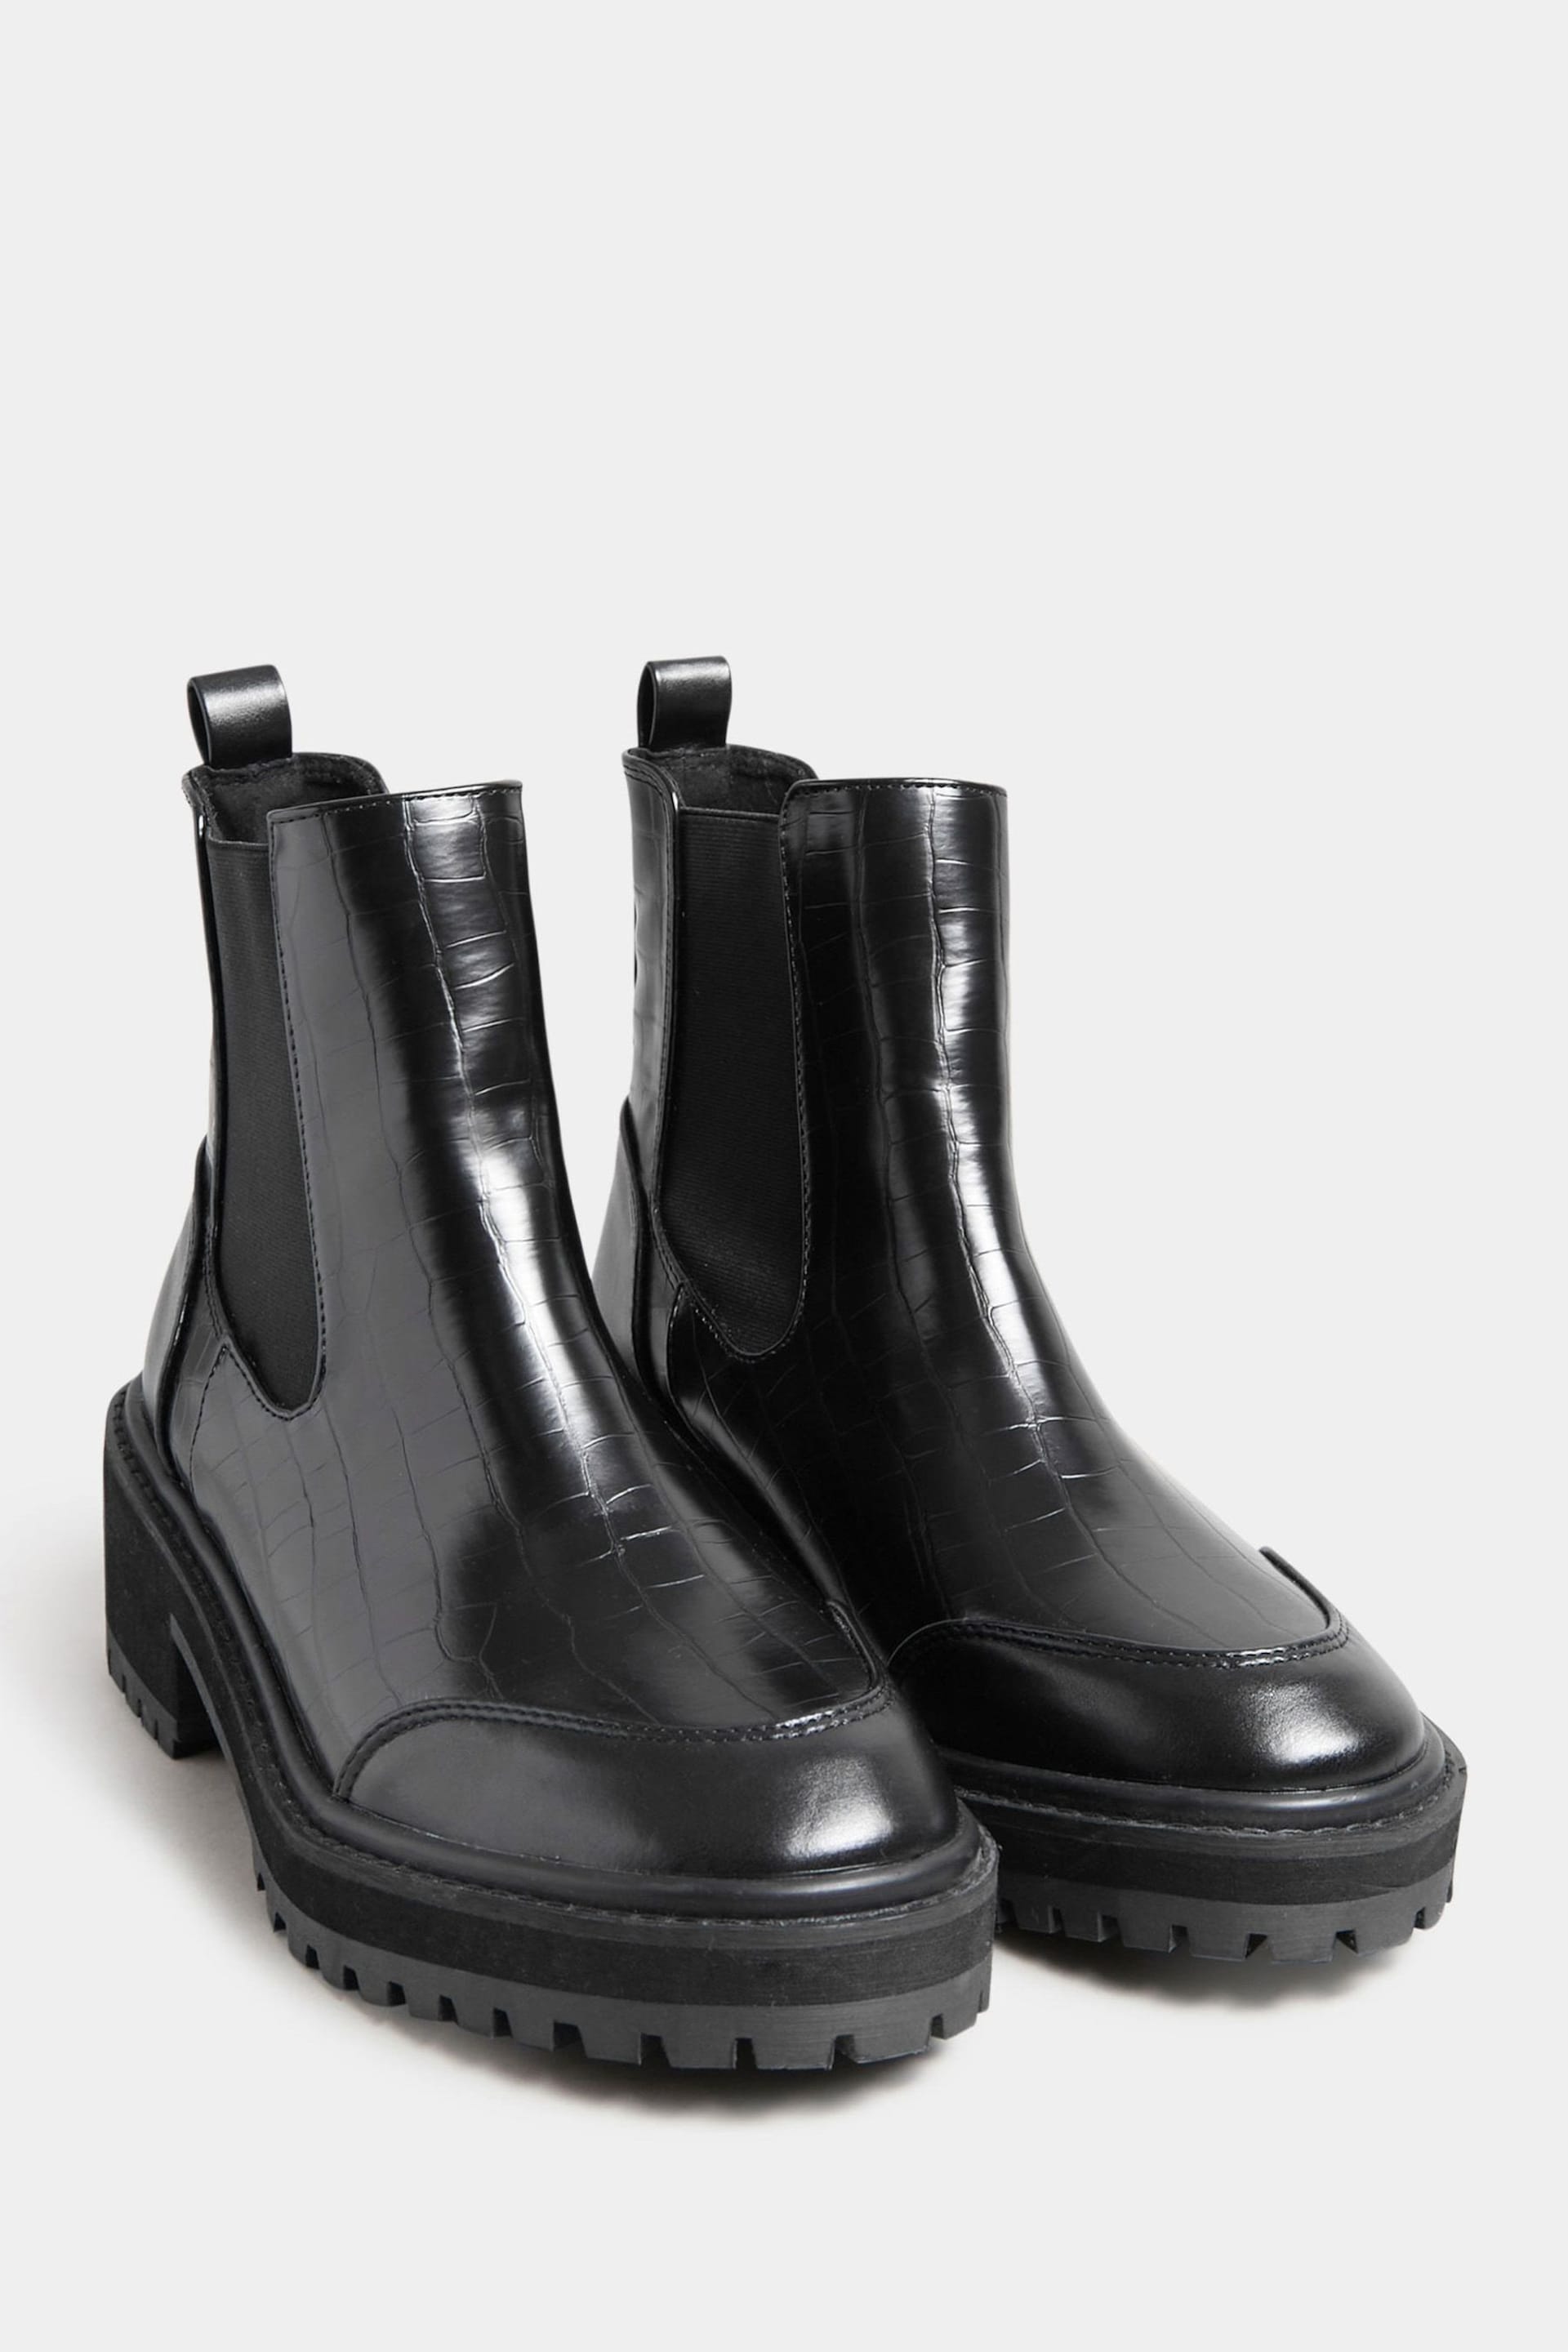 Long Tall Sally Black Chunky Chelsea Croc Effect Boots - Image 2 of 3